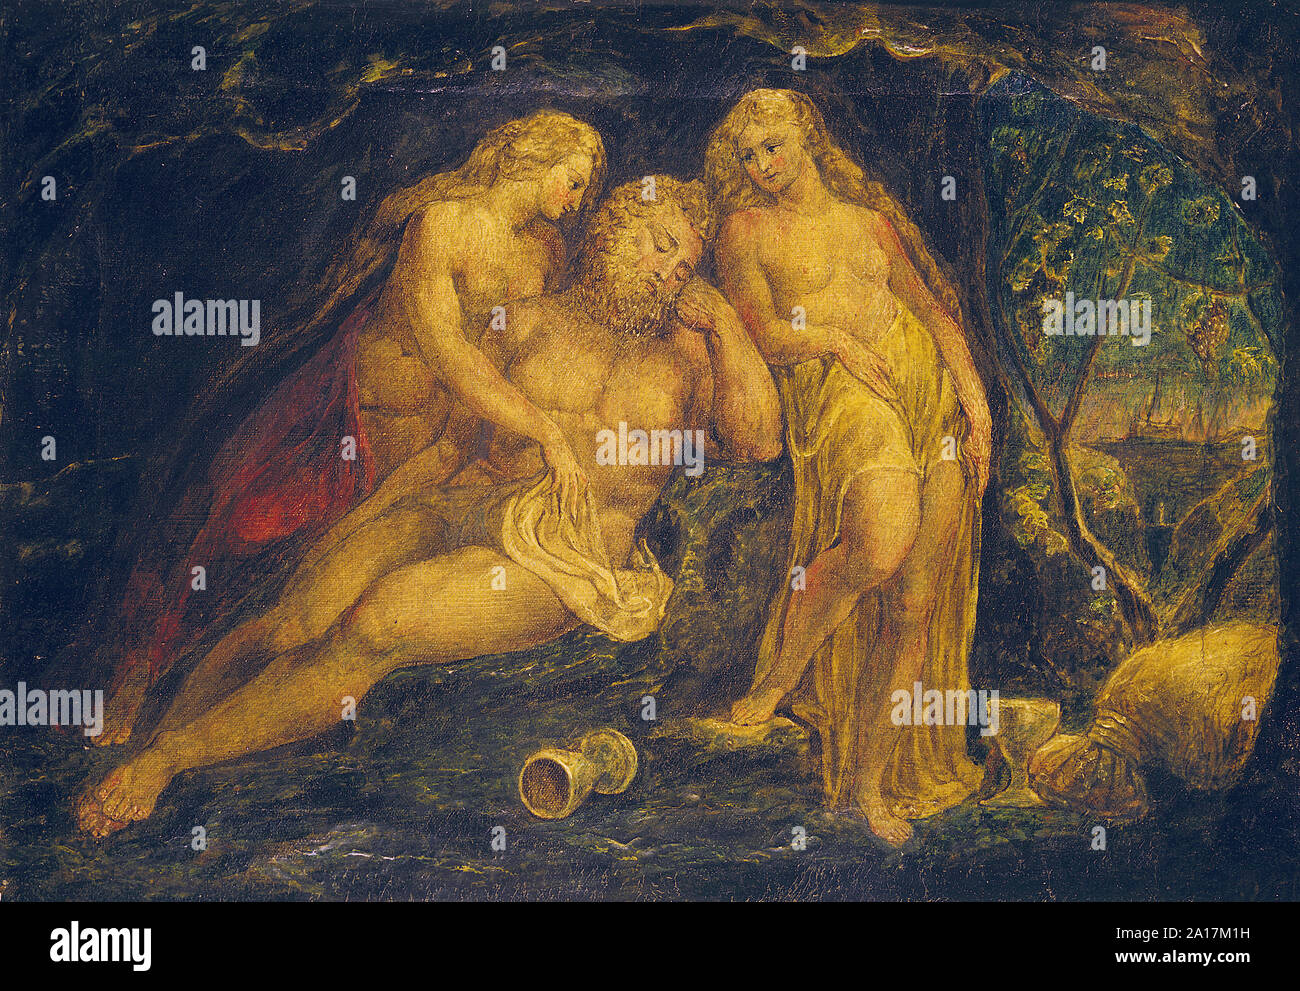 Lot and His Daughters, by William Blake, c. 1800 Stock Photo